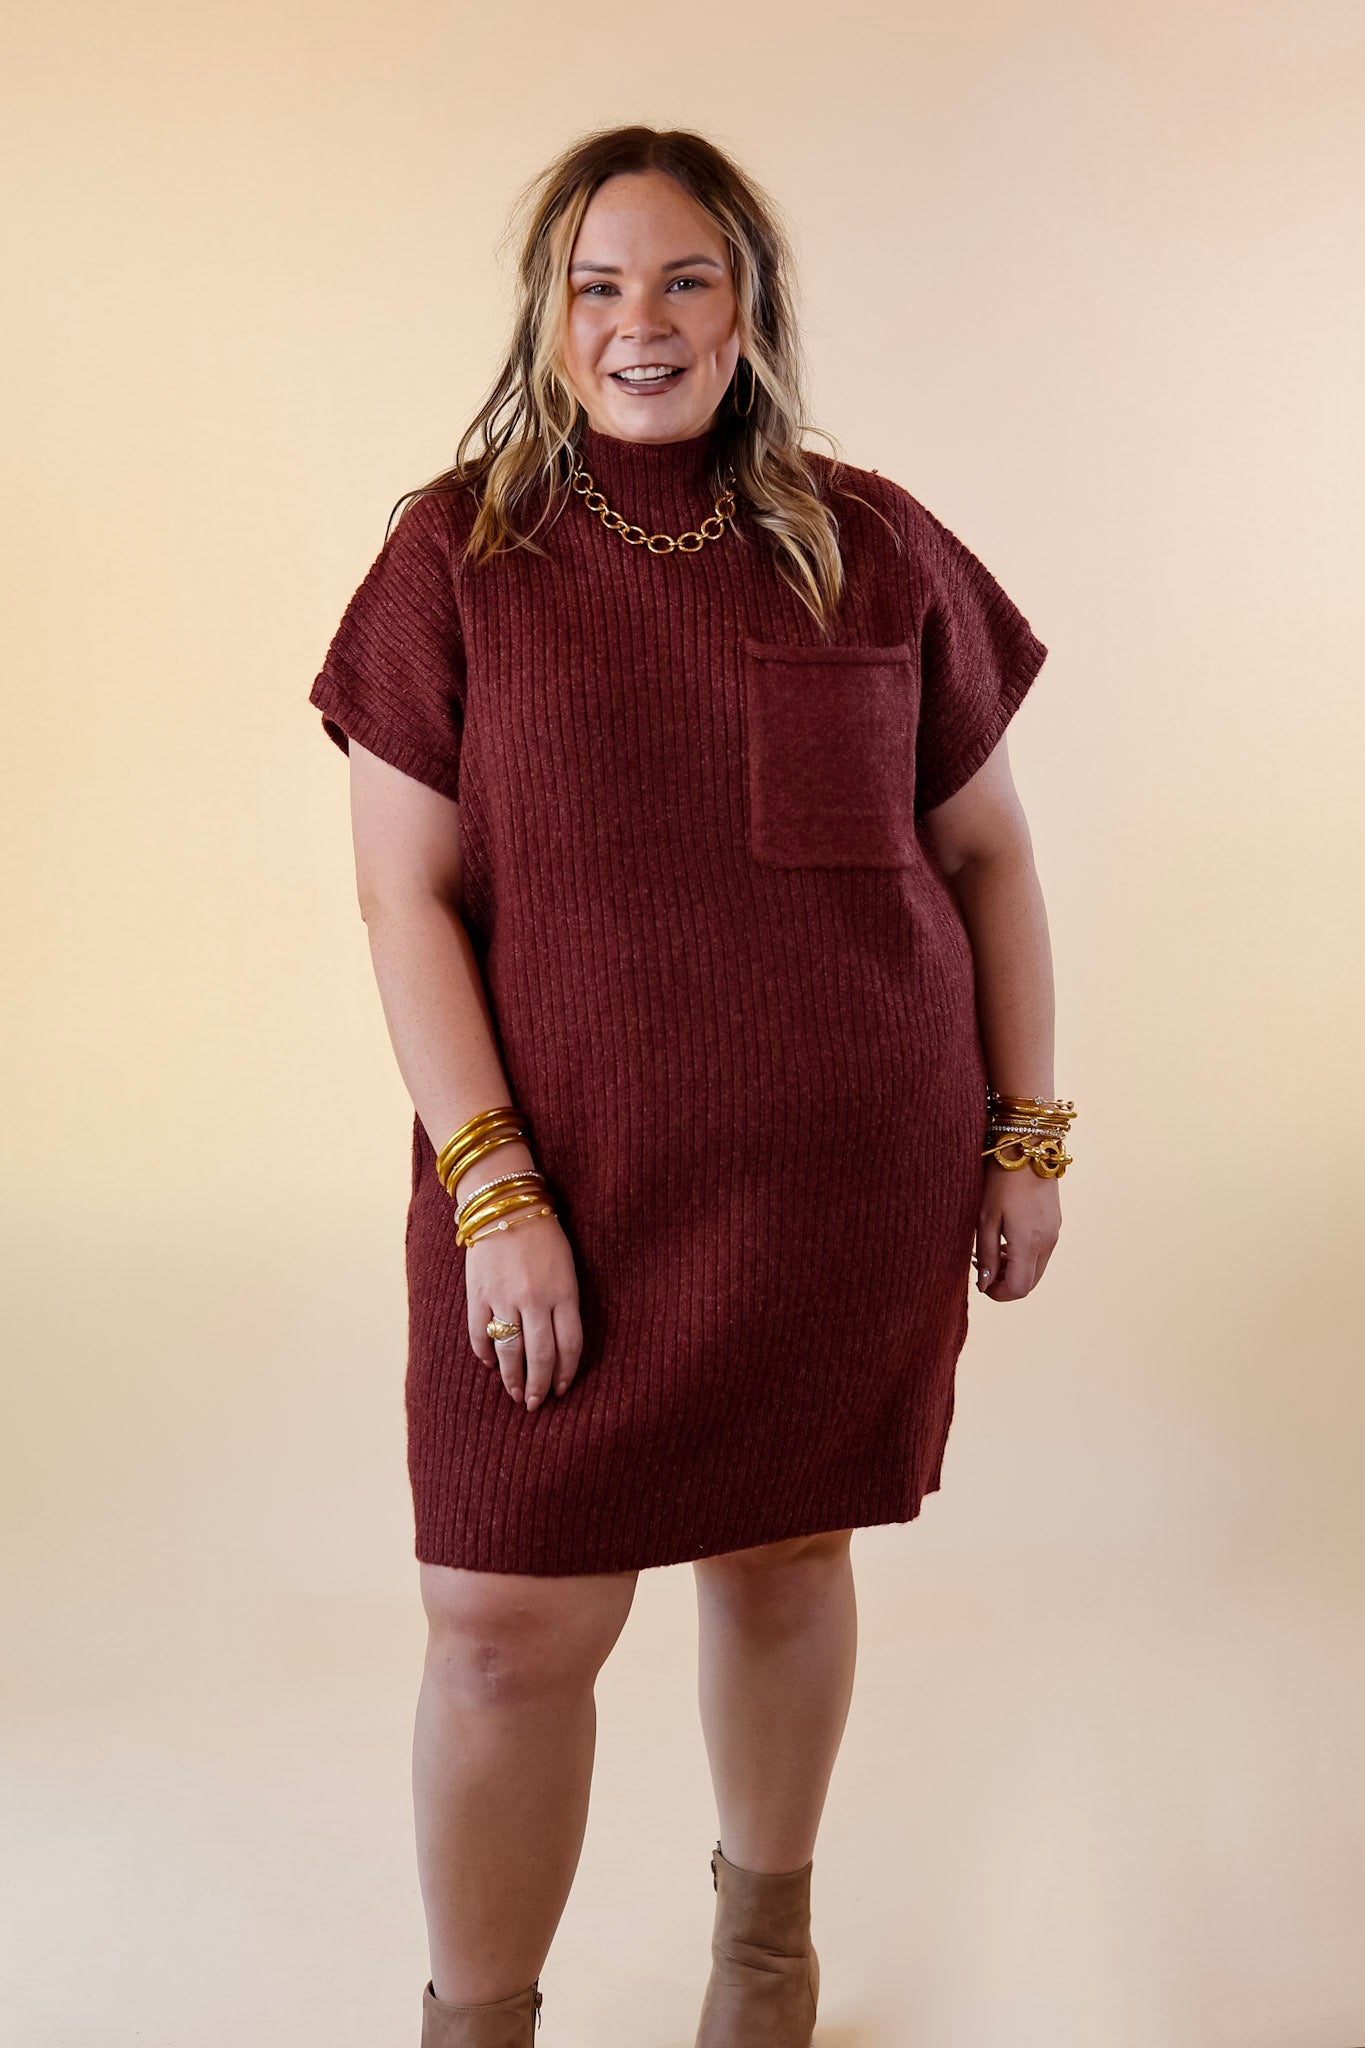 City Sights Cap Sleeve Sweater Dress in Maroon - Giddy Up Glamour Boutique